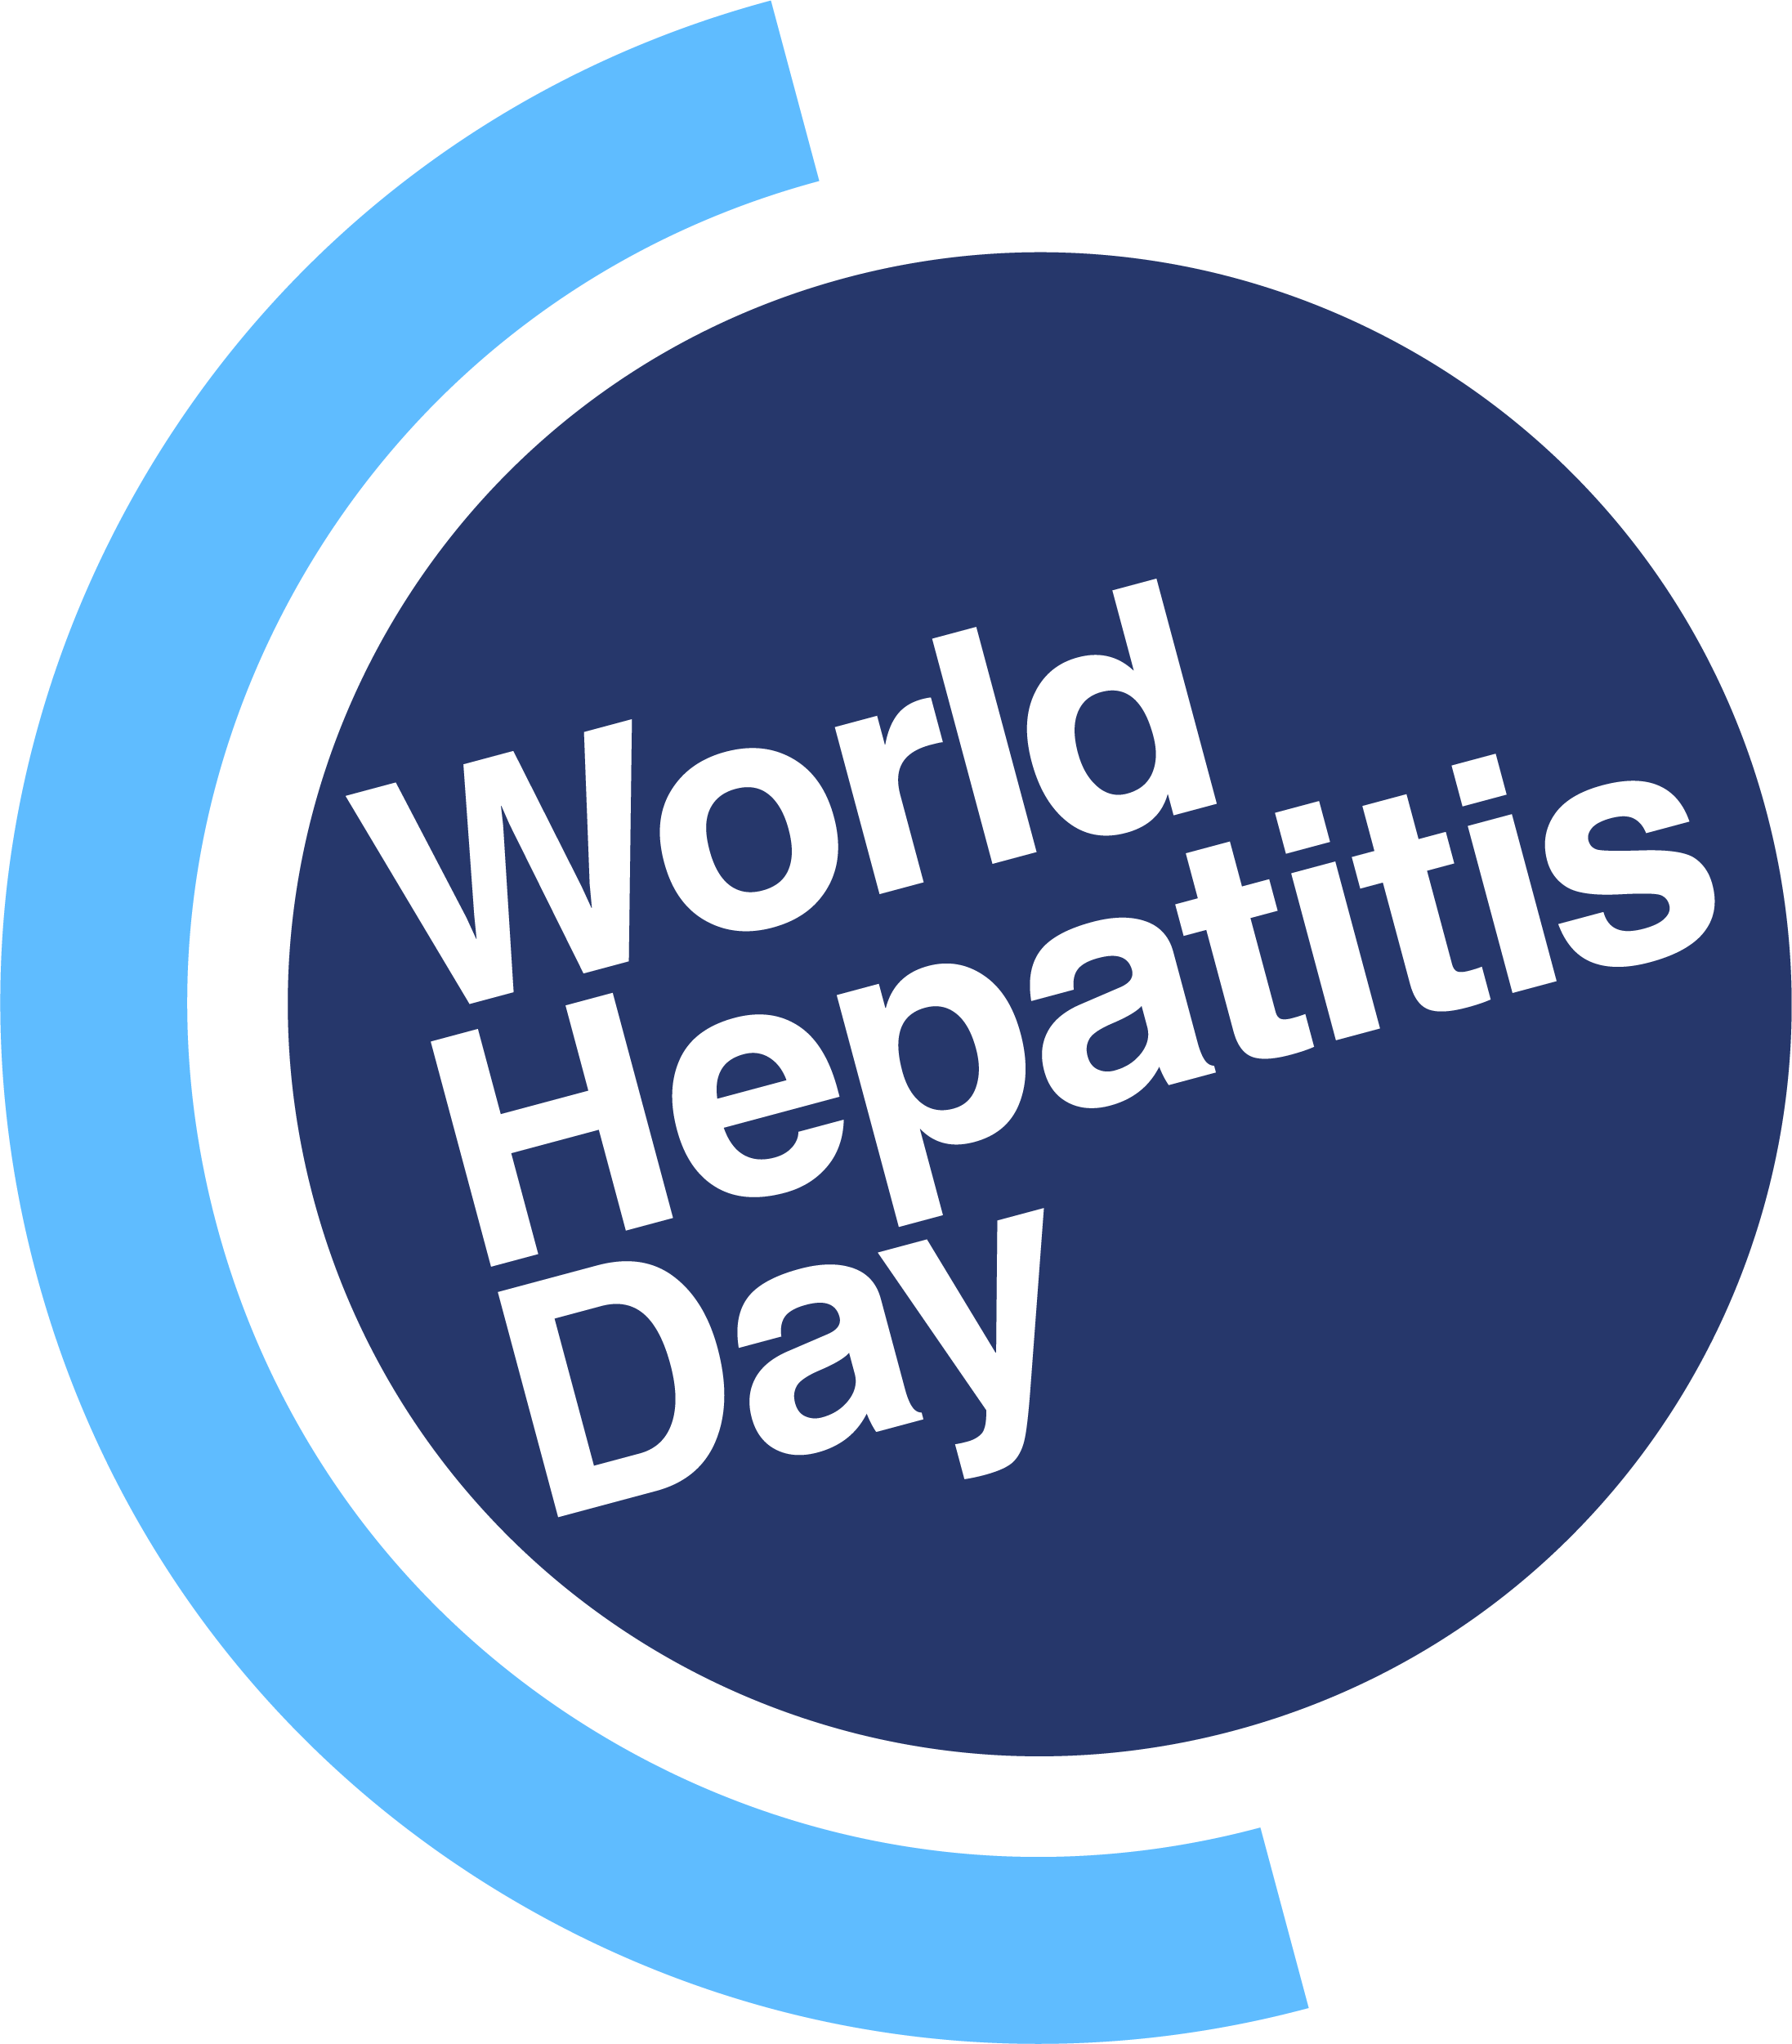 World Hepatitis Day logo, with tilted 'World Hepatitis Day' text on a navy circle inside blue half-circle border, suggesting the shape of a globe of the world